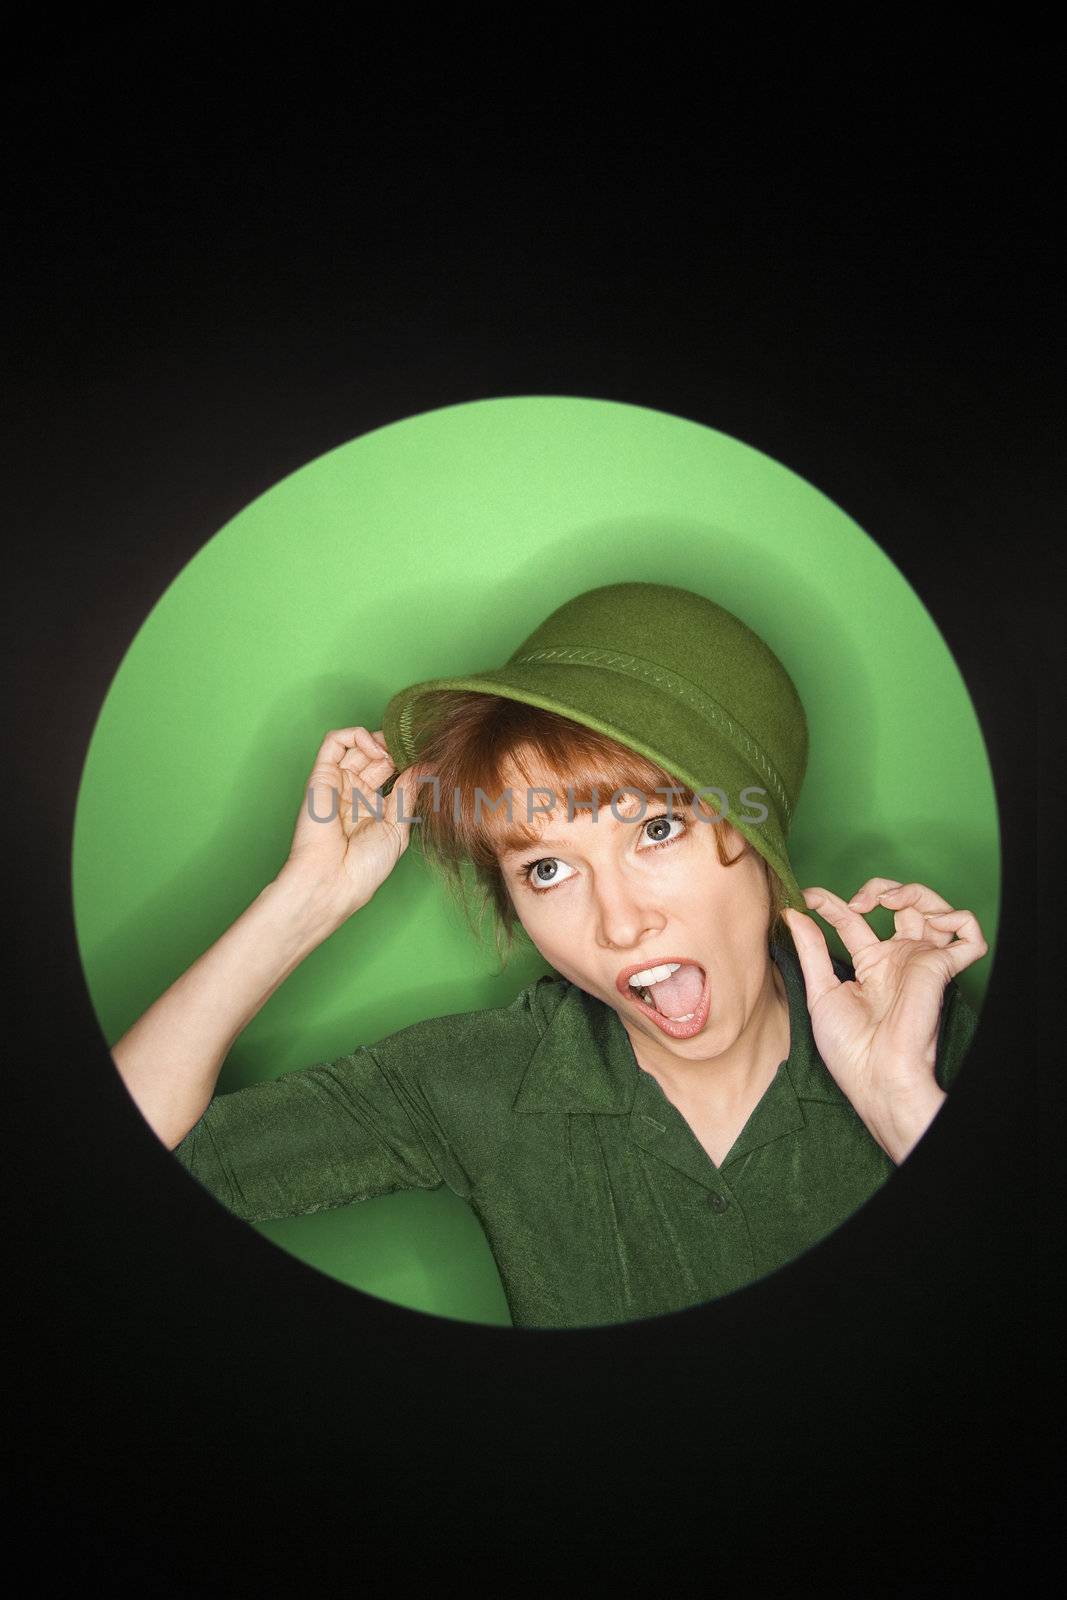 Vignette of Caucasian mid-adult woman tilting hat on green background.